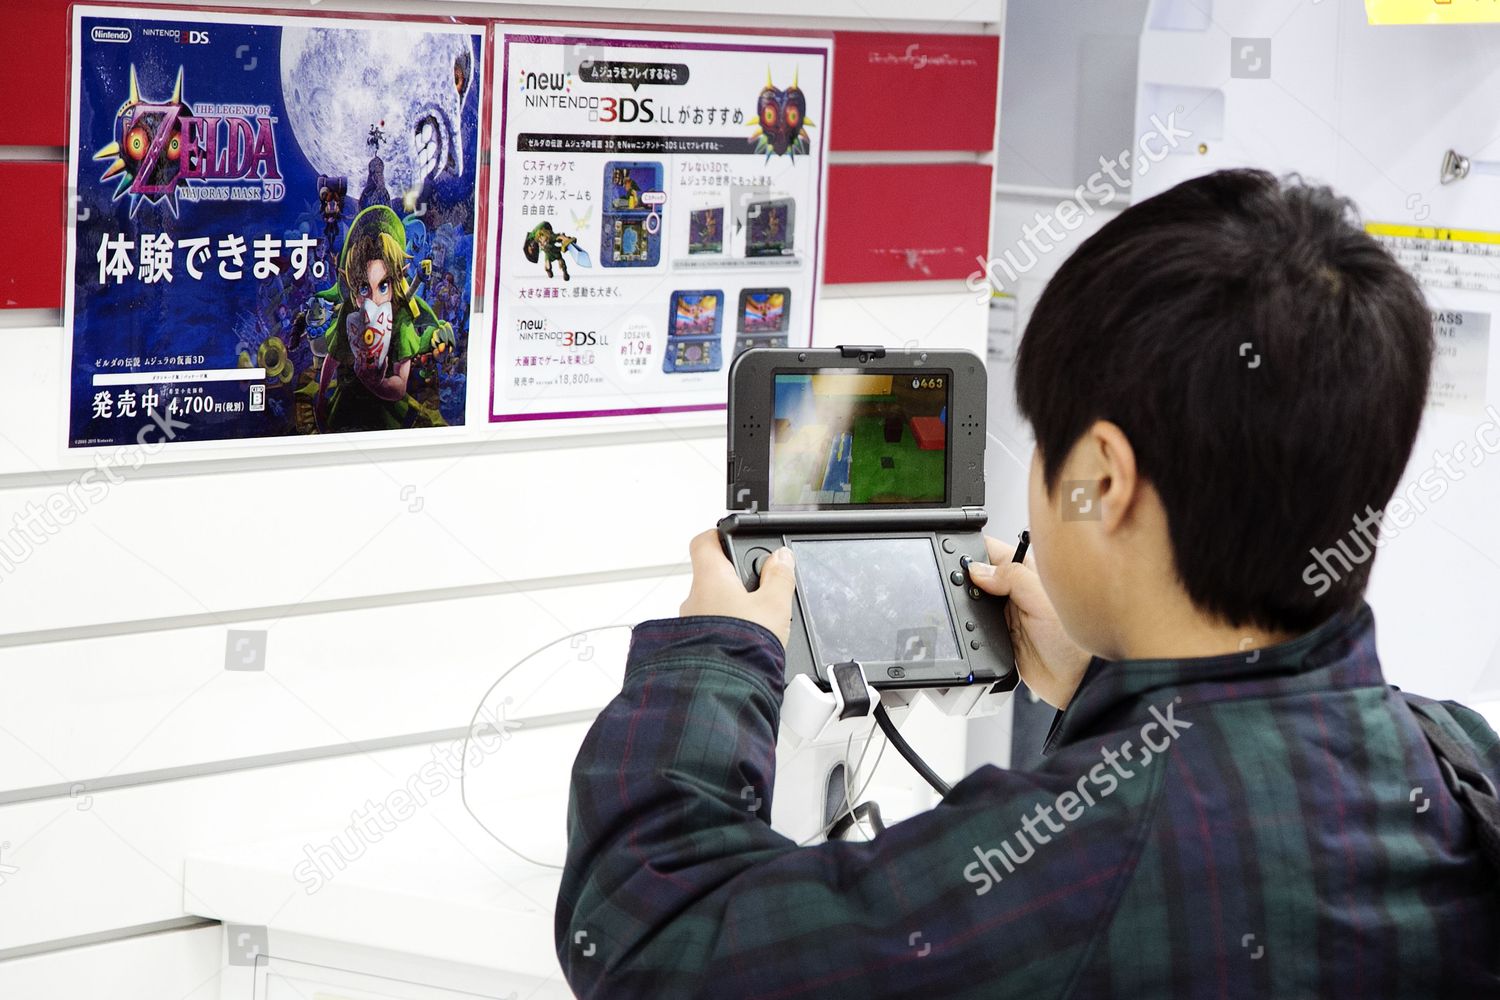 Boy Plays Nintendo 3ds Console Electronics Shop Editorial Stock Photo Stock Image Shutterstock